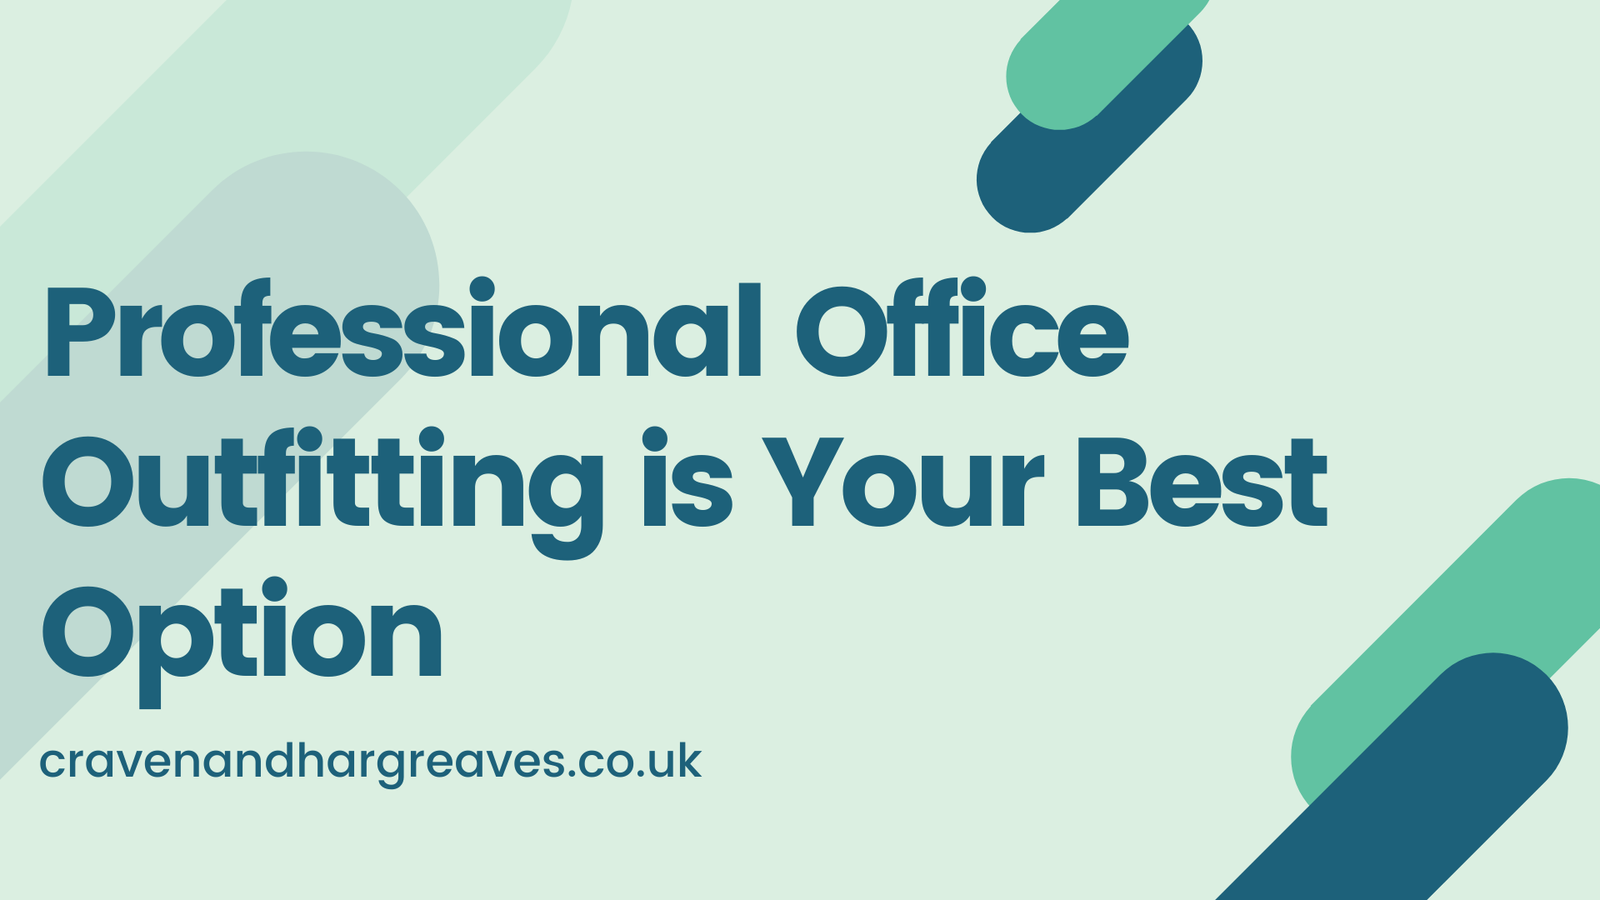 Professional Office Outfitting is Your Best Option